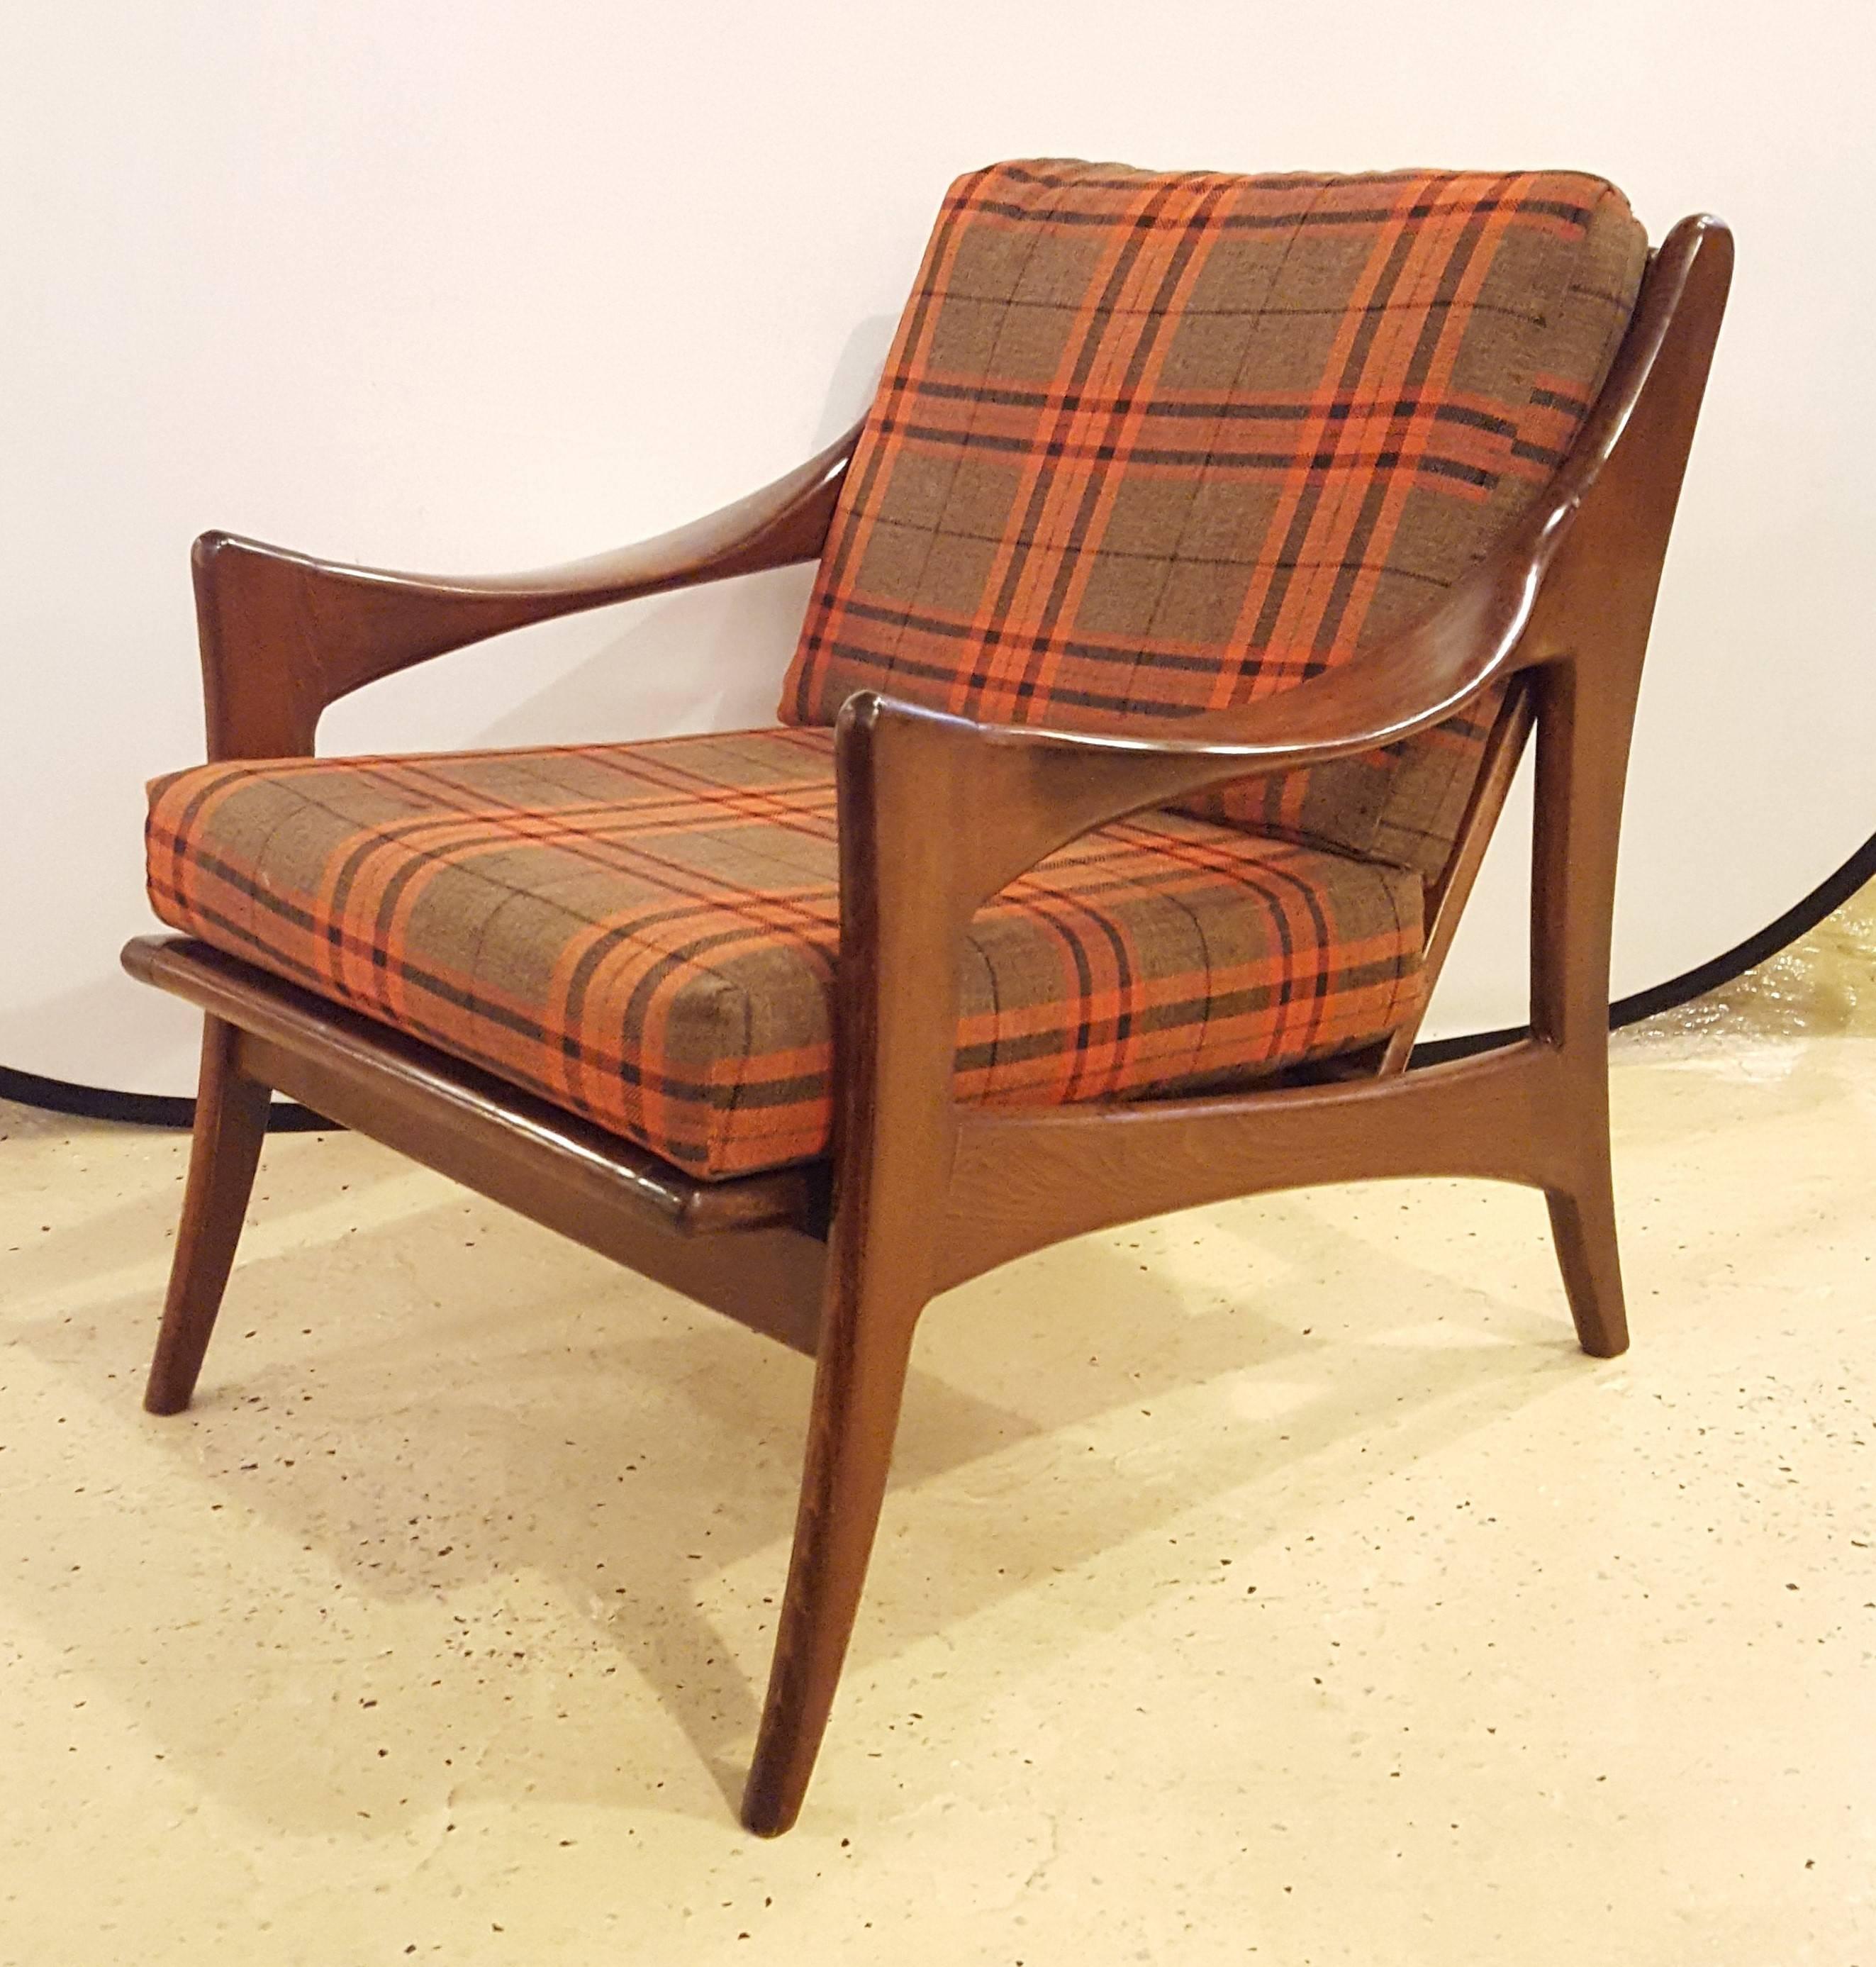 Pair of Mid-Century Modern Lounge Chairs 1